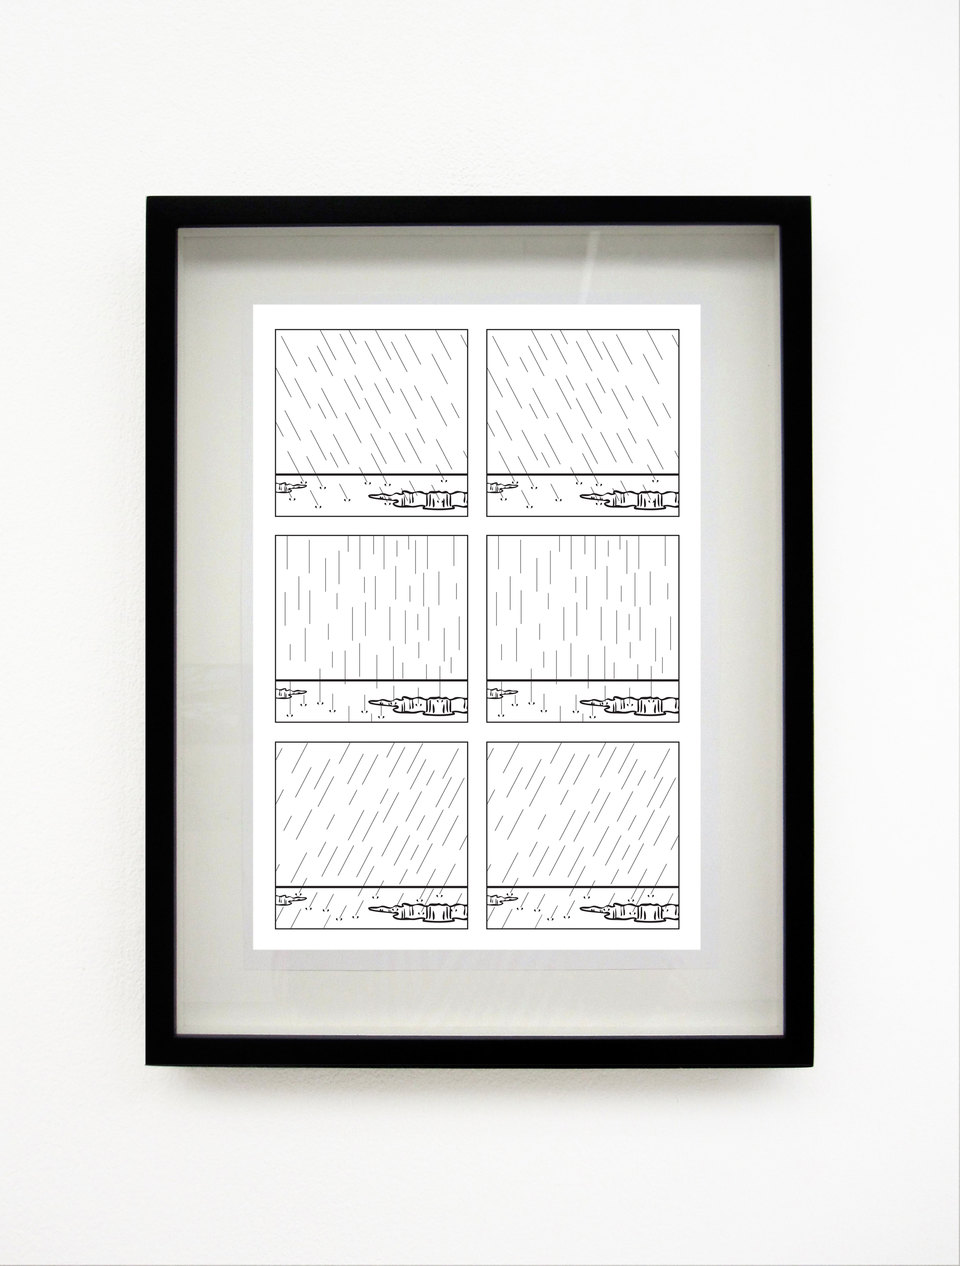 Tom Godfrey, Untitled (Rain), 2011, Hand-printed lithograph, (29.7 x 21 cm), Ed 5 + 2AP, Cell Project Space